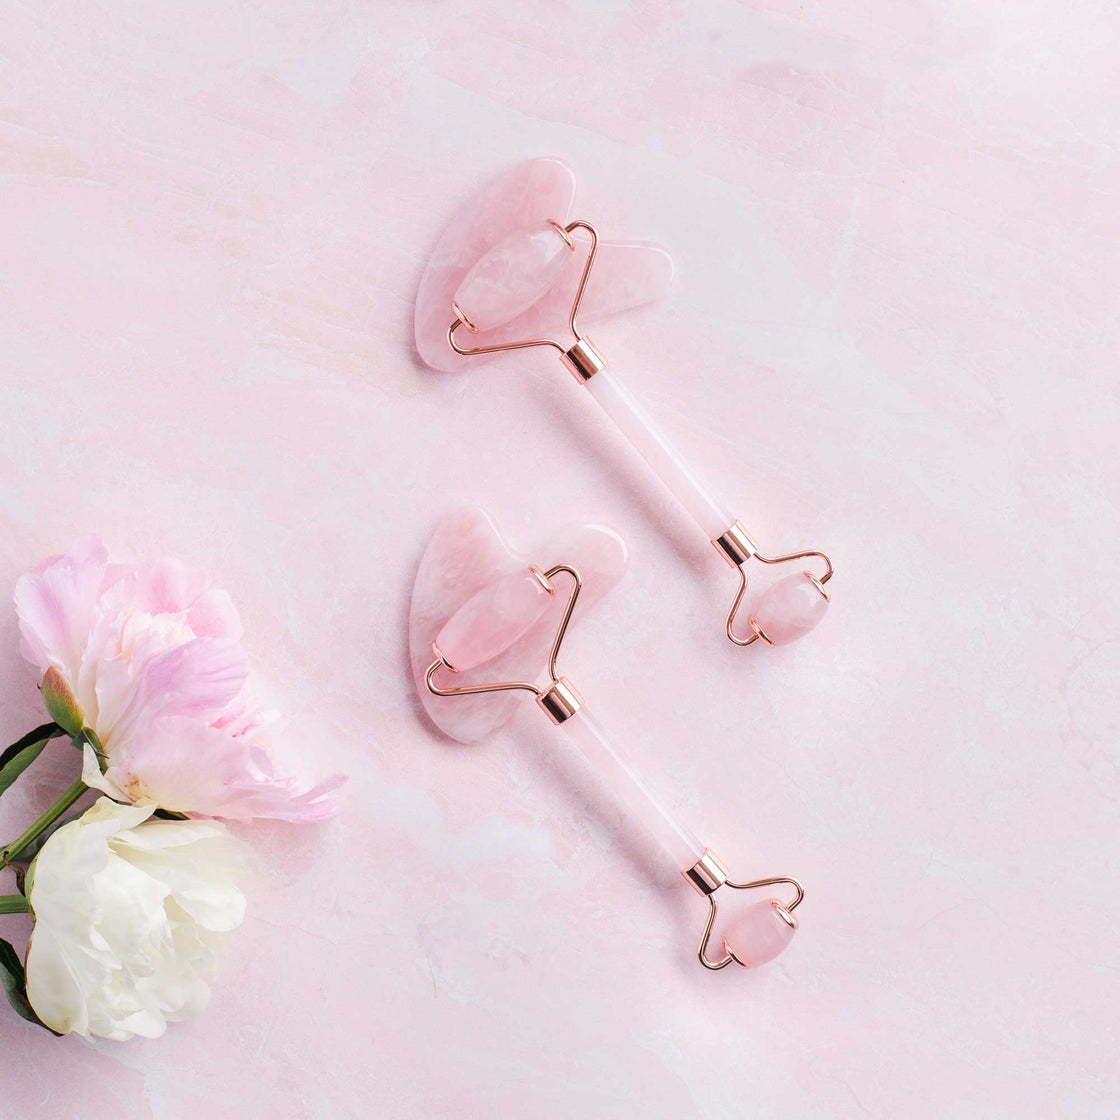 rose quartz facial rollers and gua sha set pictured on pink background with fresh pink and white peonies